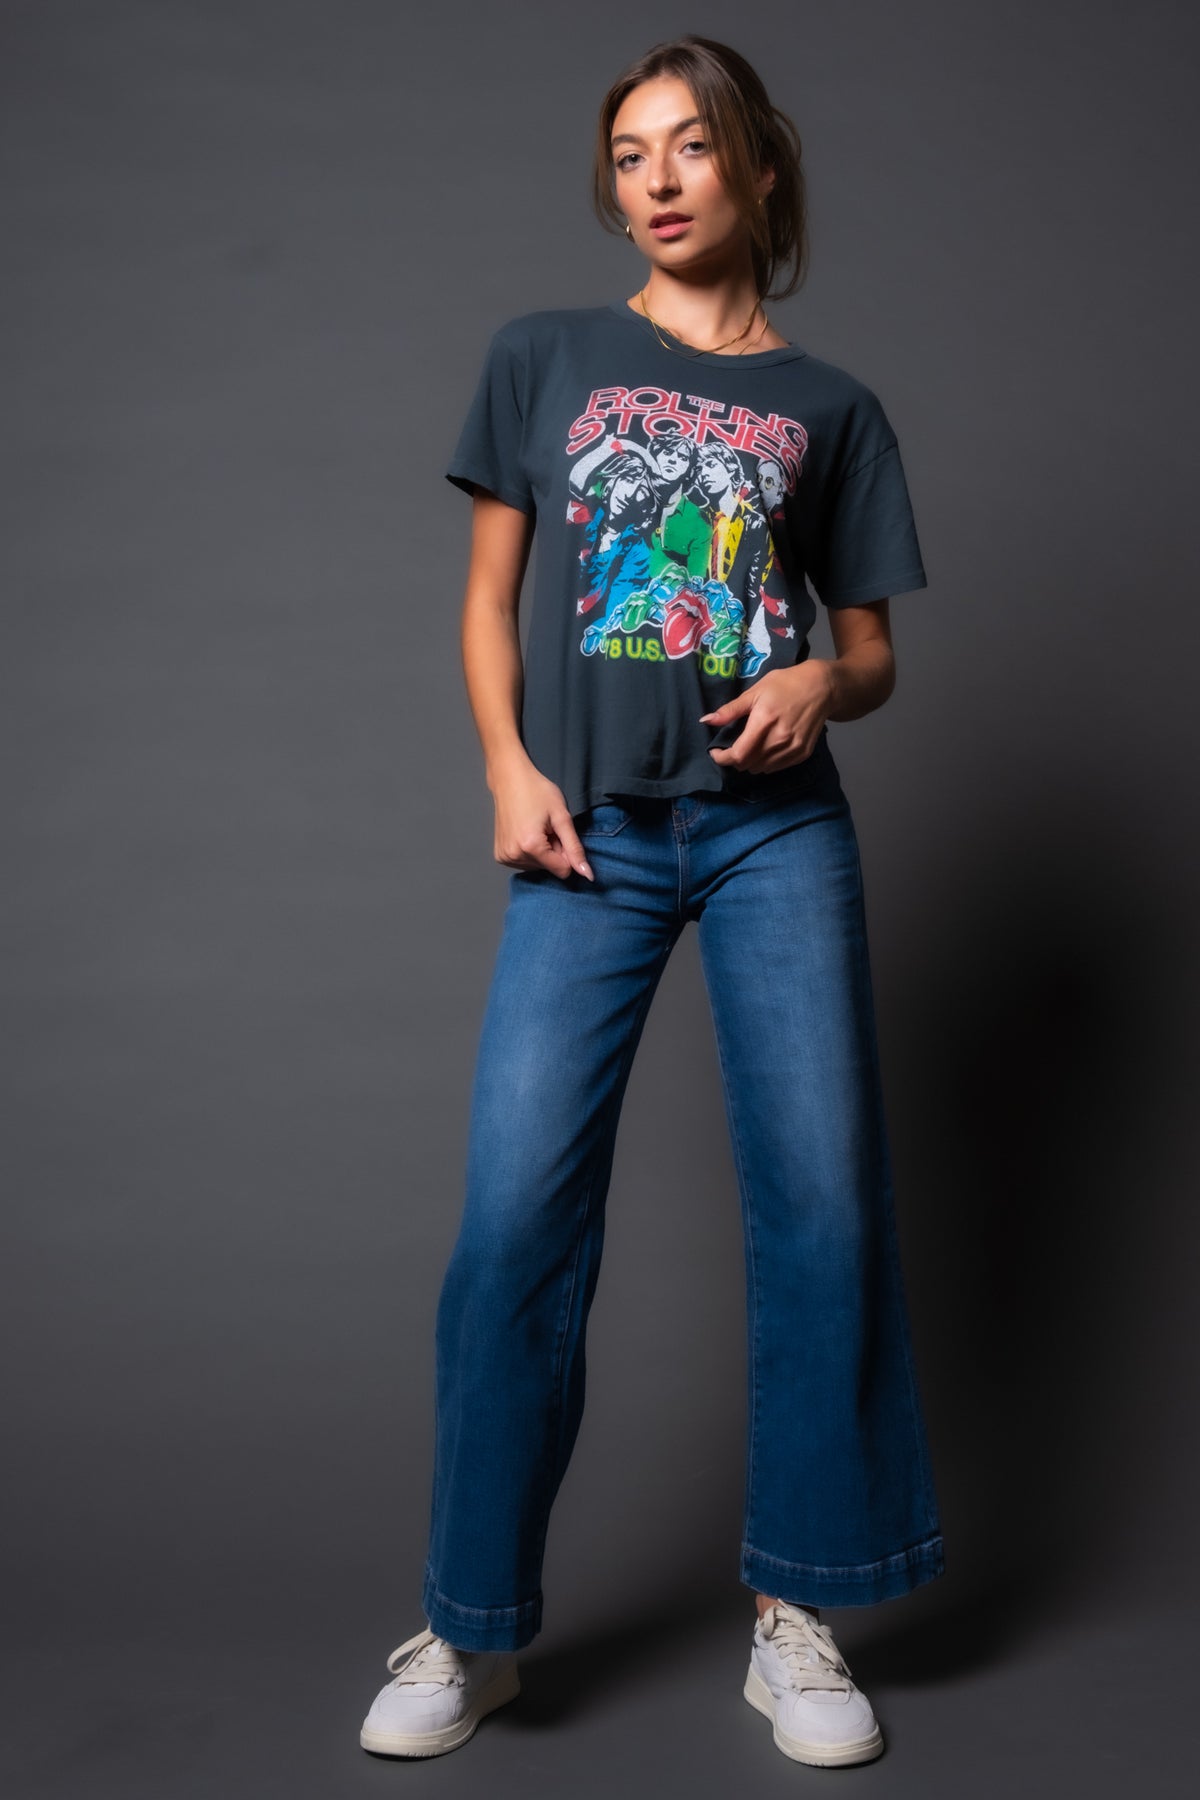 Daydreamer Rolling Stones '78 US Tour Ringer Tee